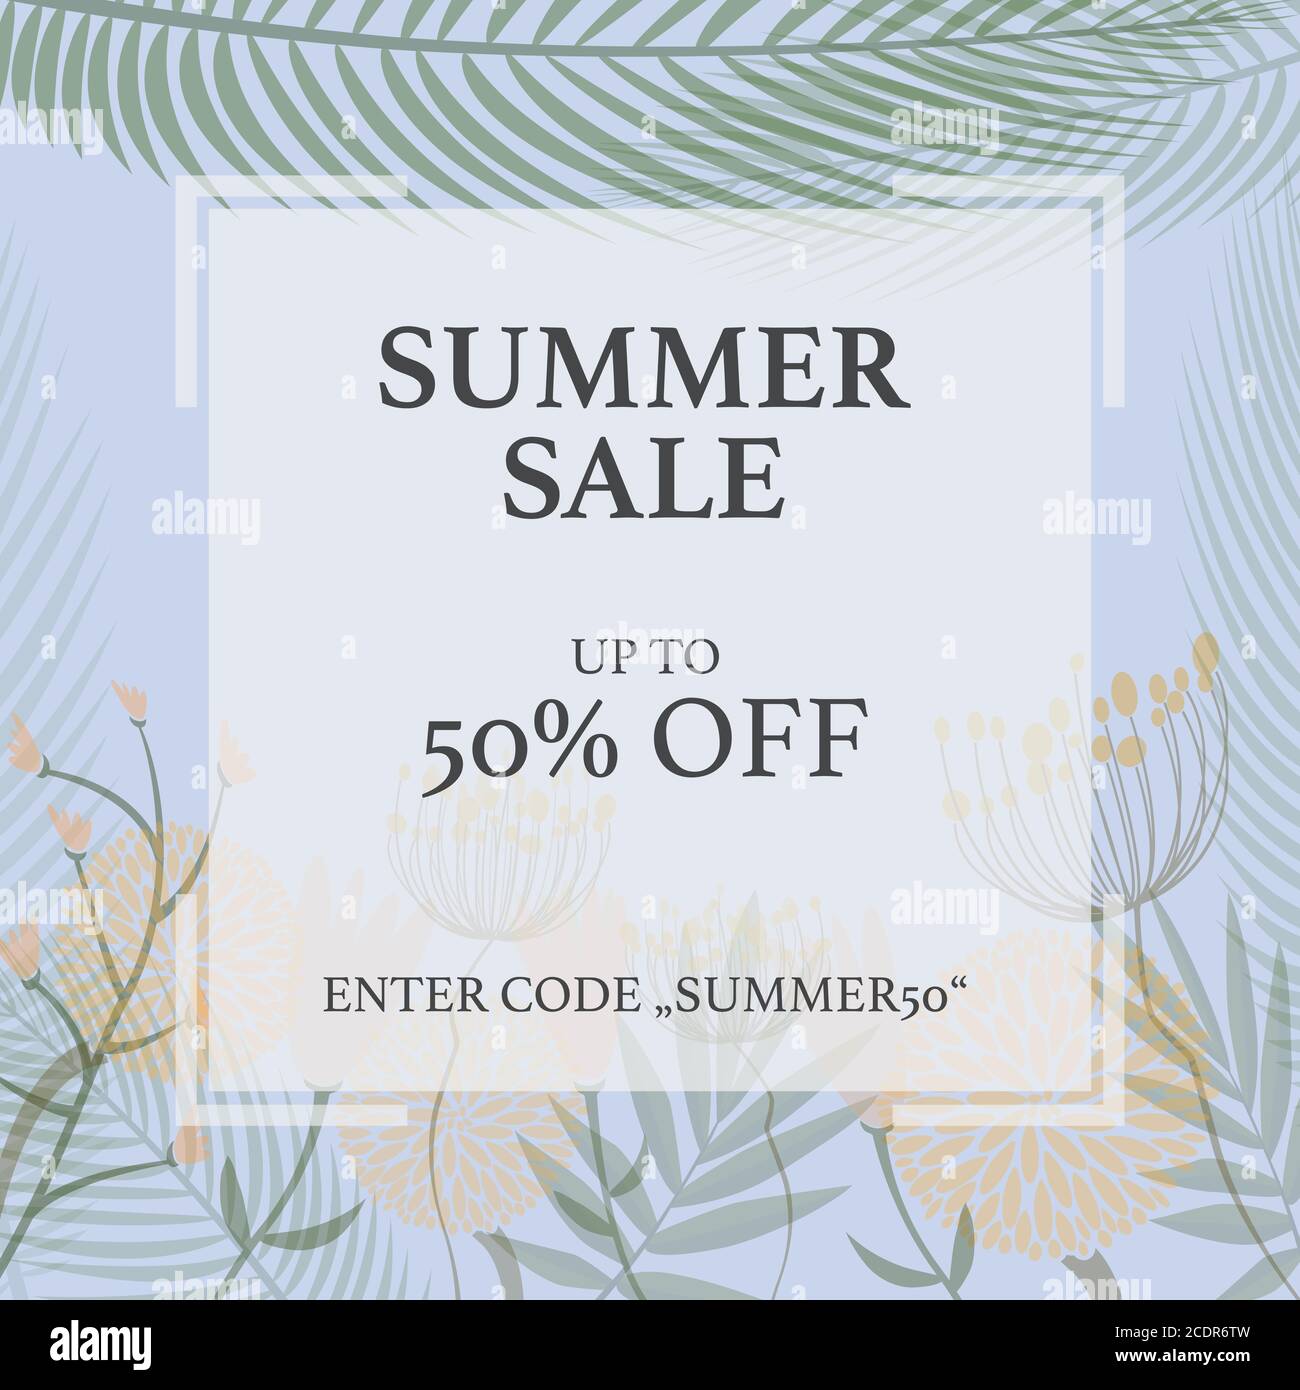 SUMMER SALE promotional flyer template for website or social media with field flower pattern vector illustration Stock Vector